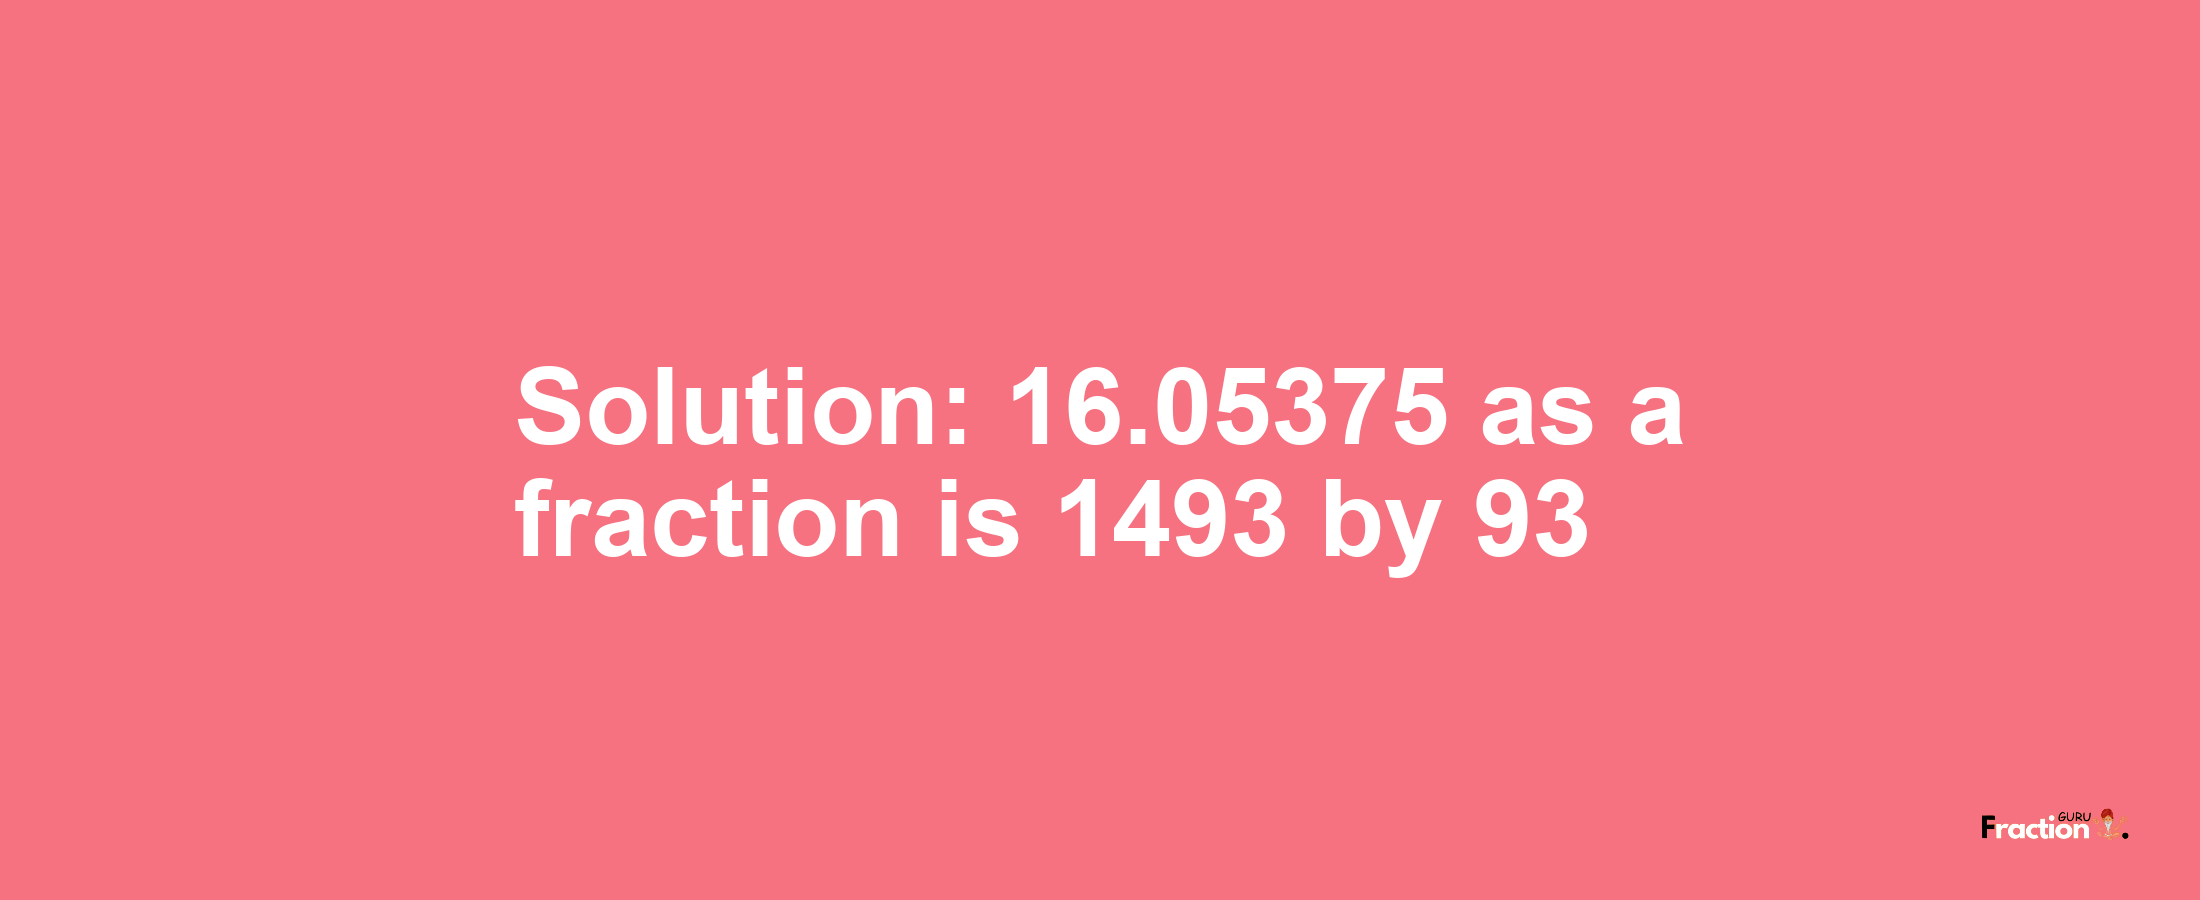 Solution:16.05375 as a fraction is 1493/93